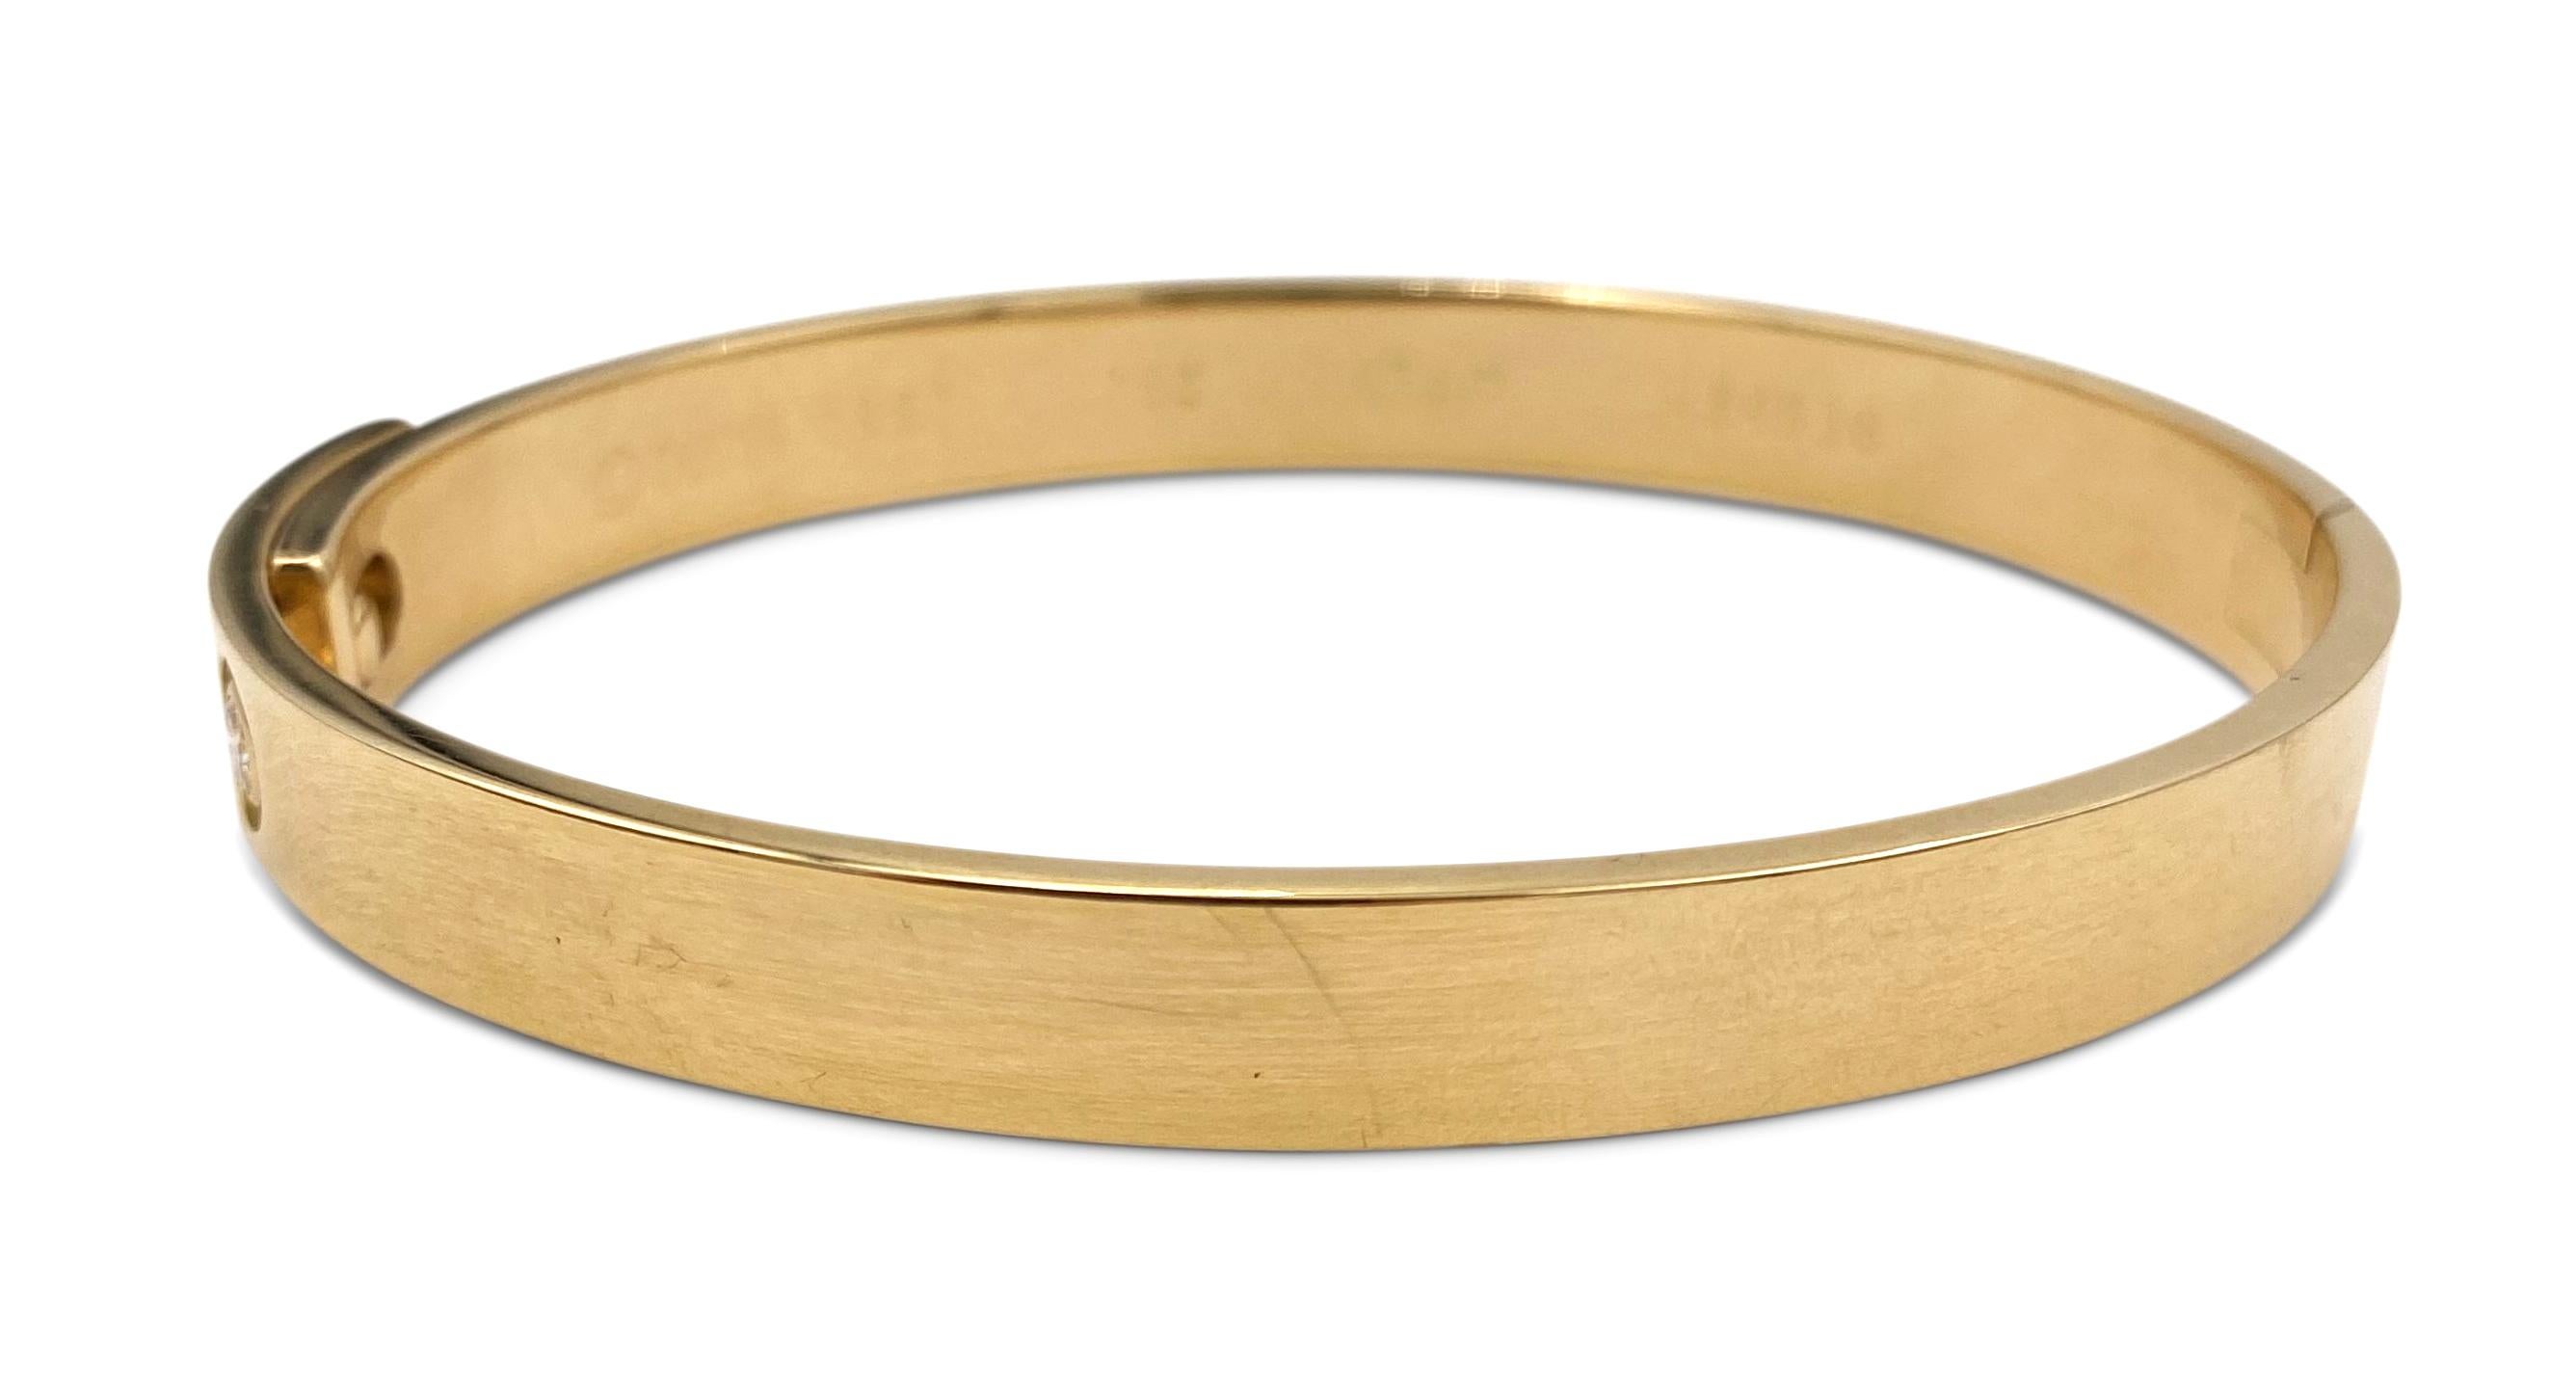 Authentic Cartier Anniversary bracelet crafted in 18 karat yellow gold and featuring 1 round brilliant diamond weighing approximately .10ct.  Size 17.  Signed Cartier, 1997, 750, 17cm, with serial number and hallmarks.  Does not come with Cartier